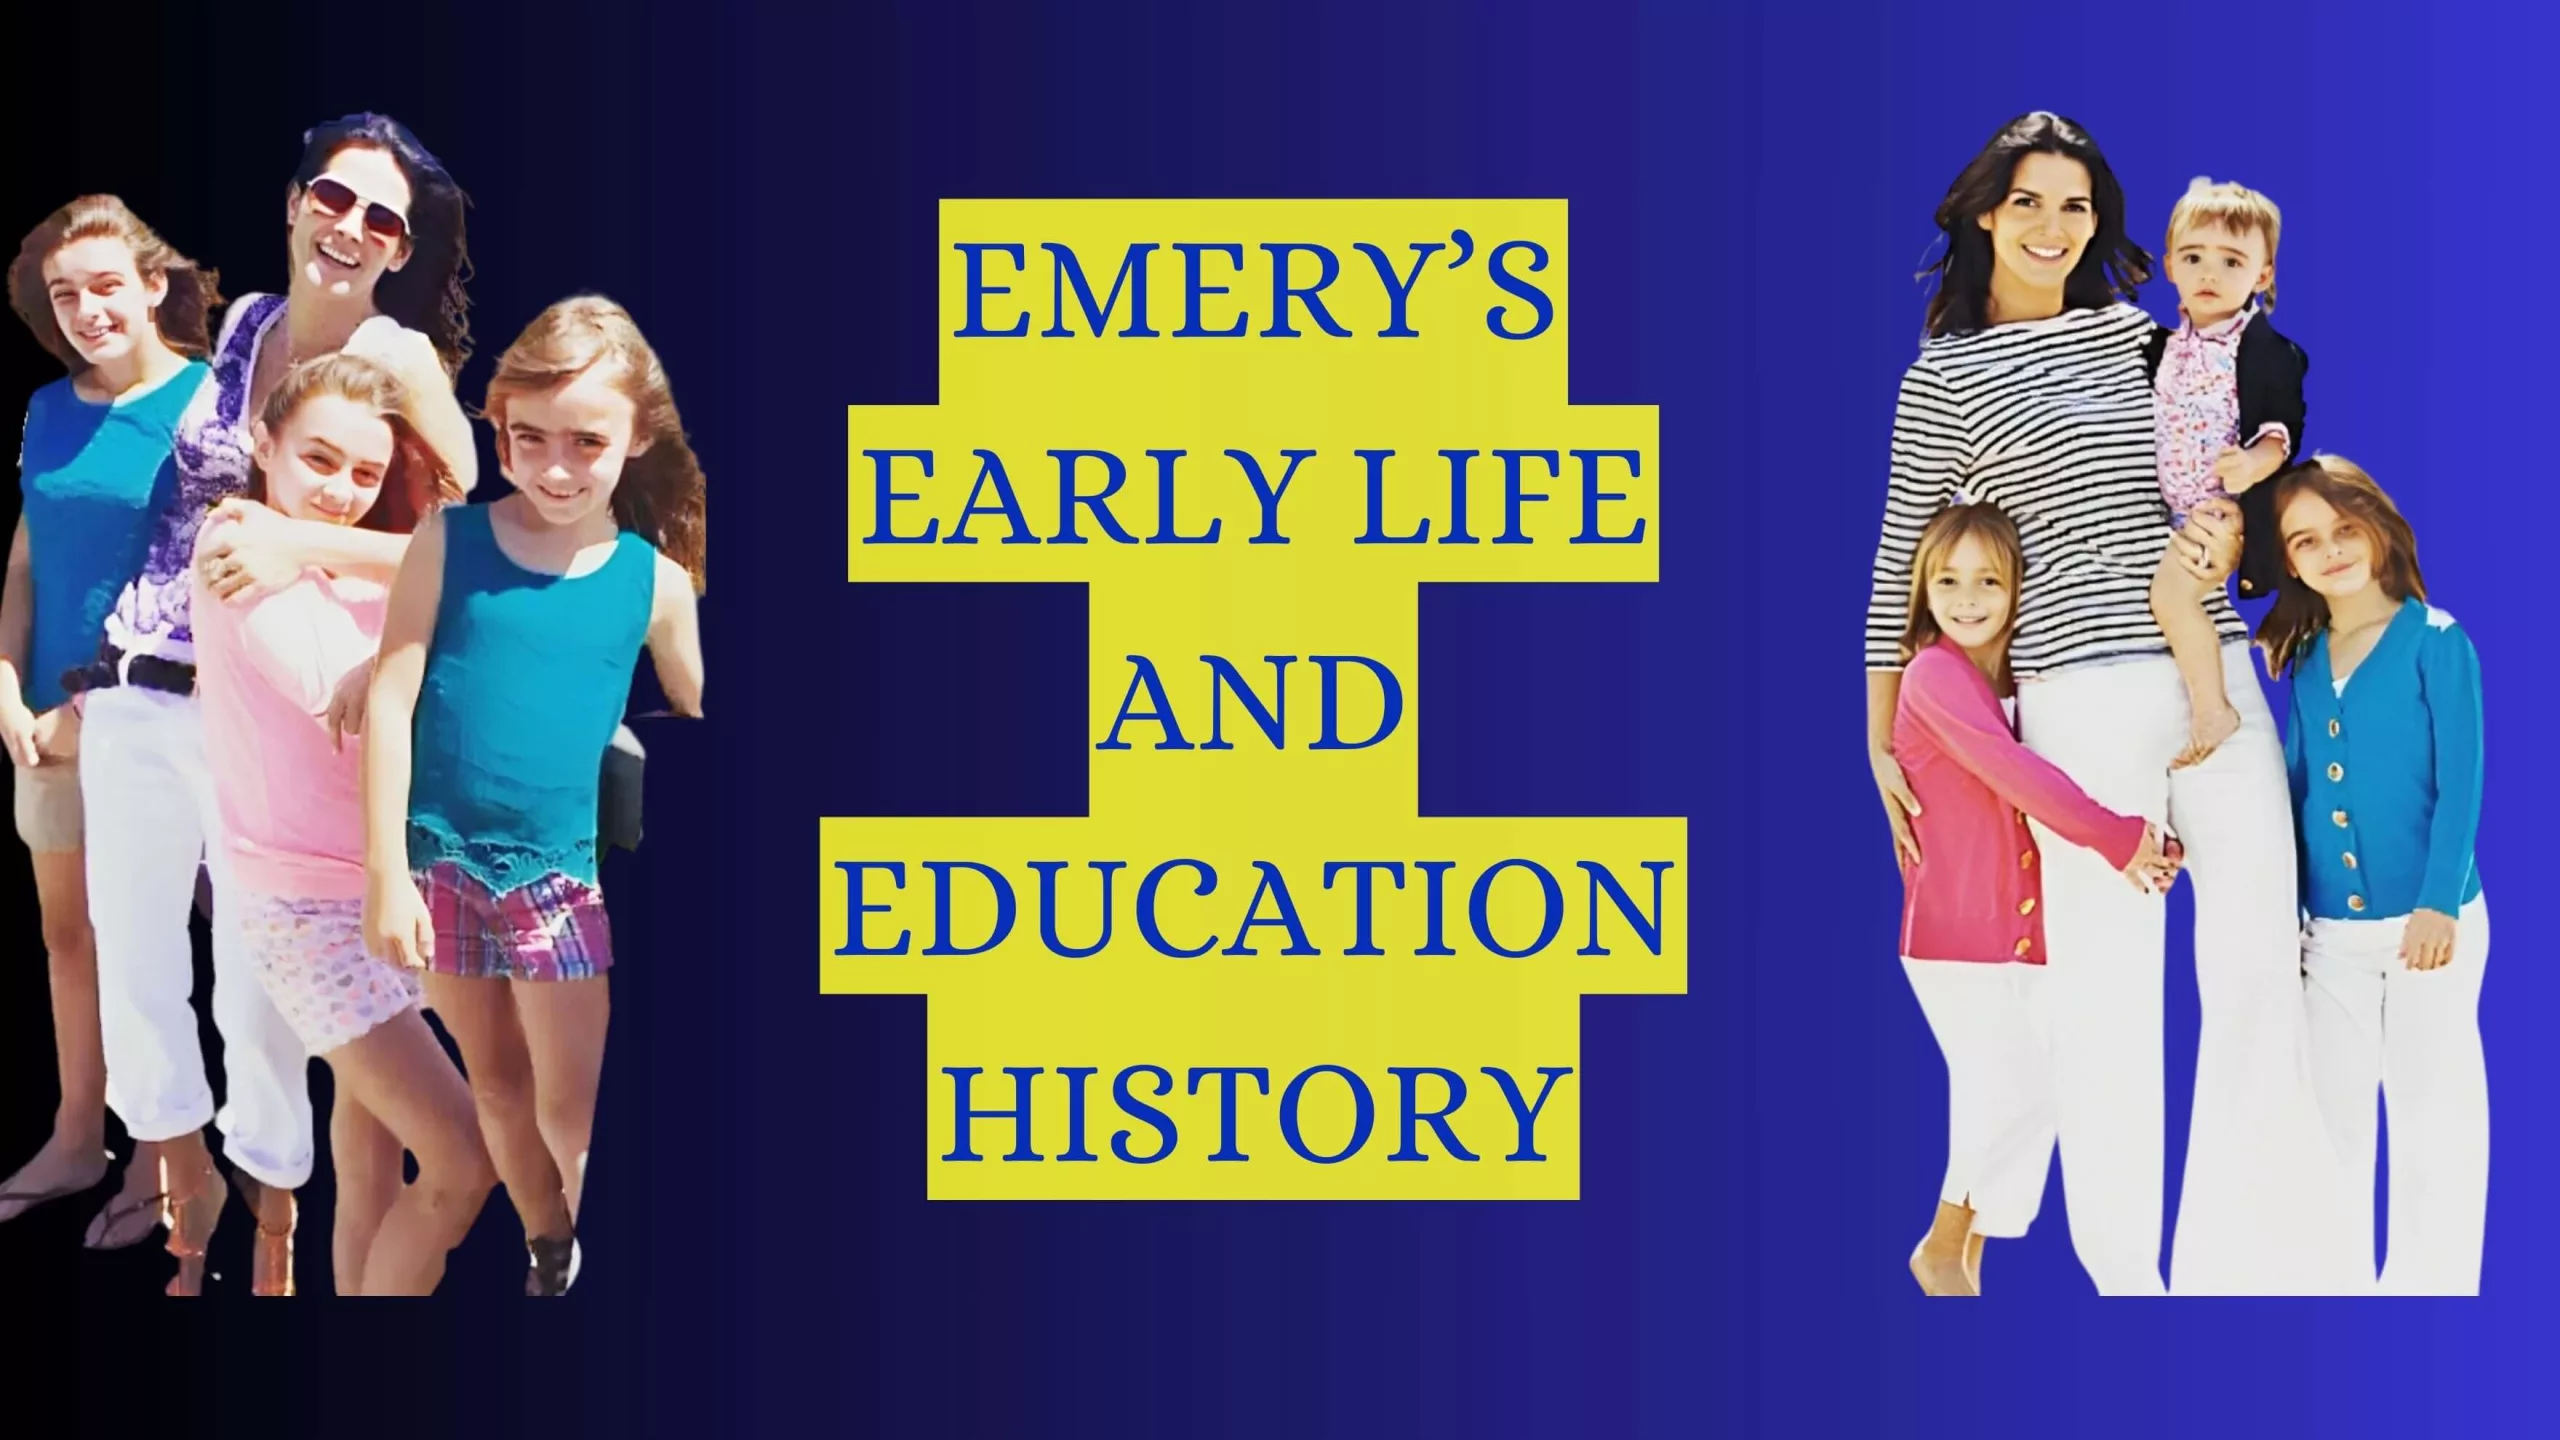 Emery’s Early Life and Education History